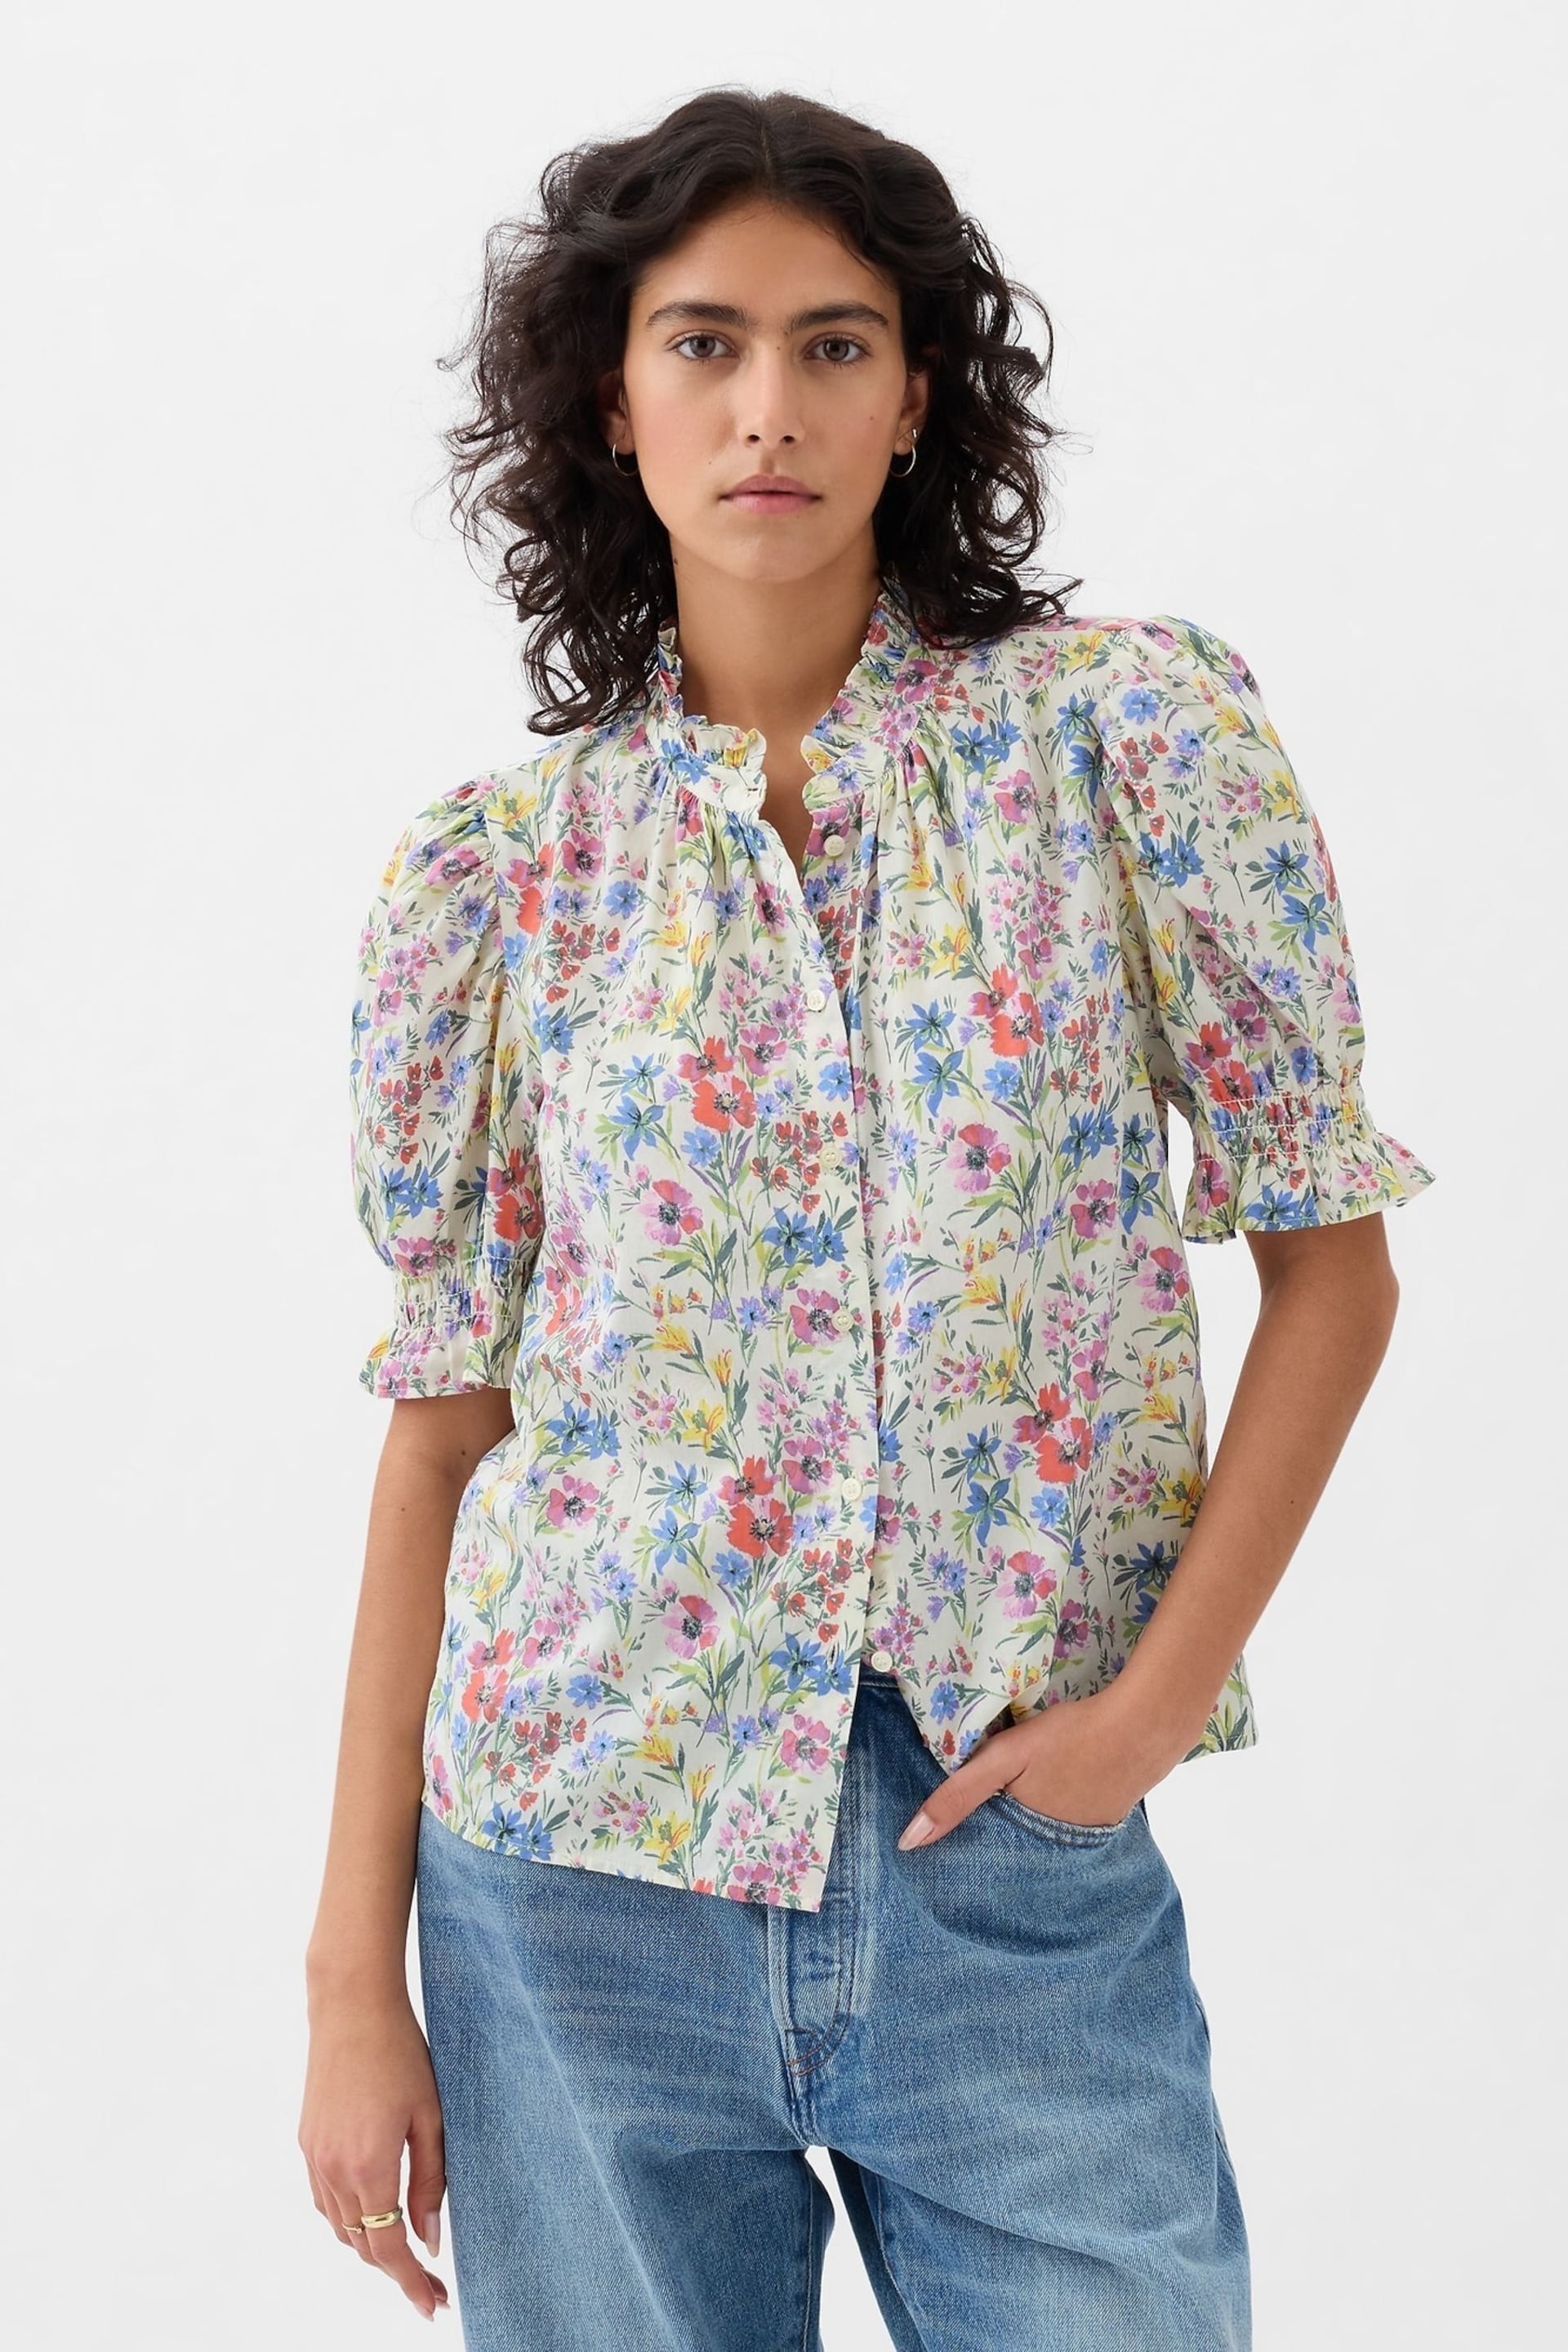 Gap White Floral High Neck Puff Sleeve Button Shirt - Image 1 of 4